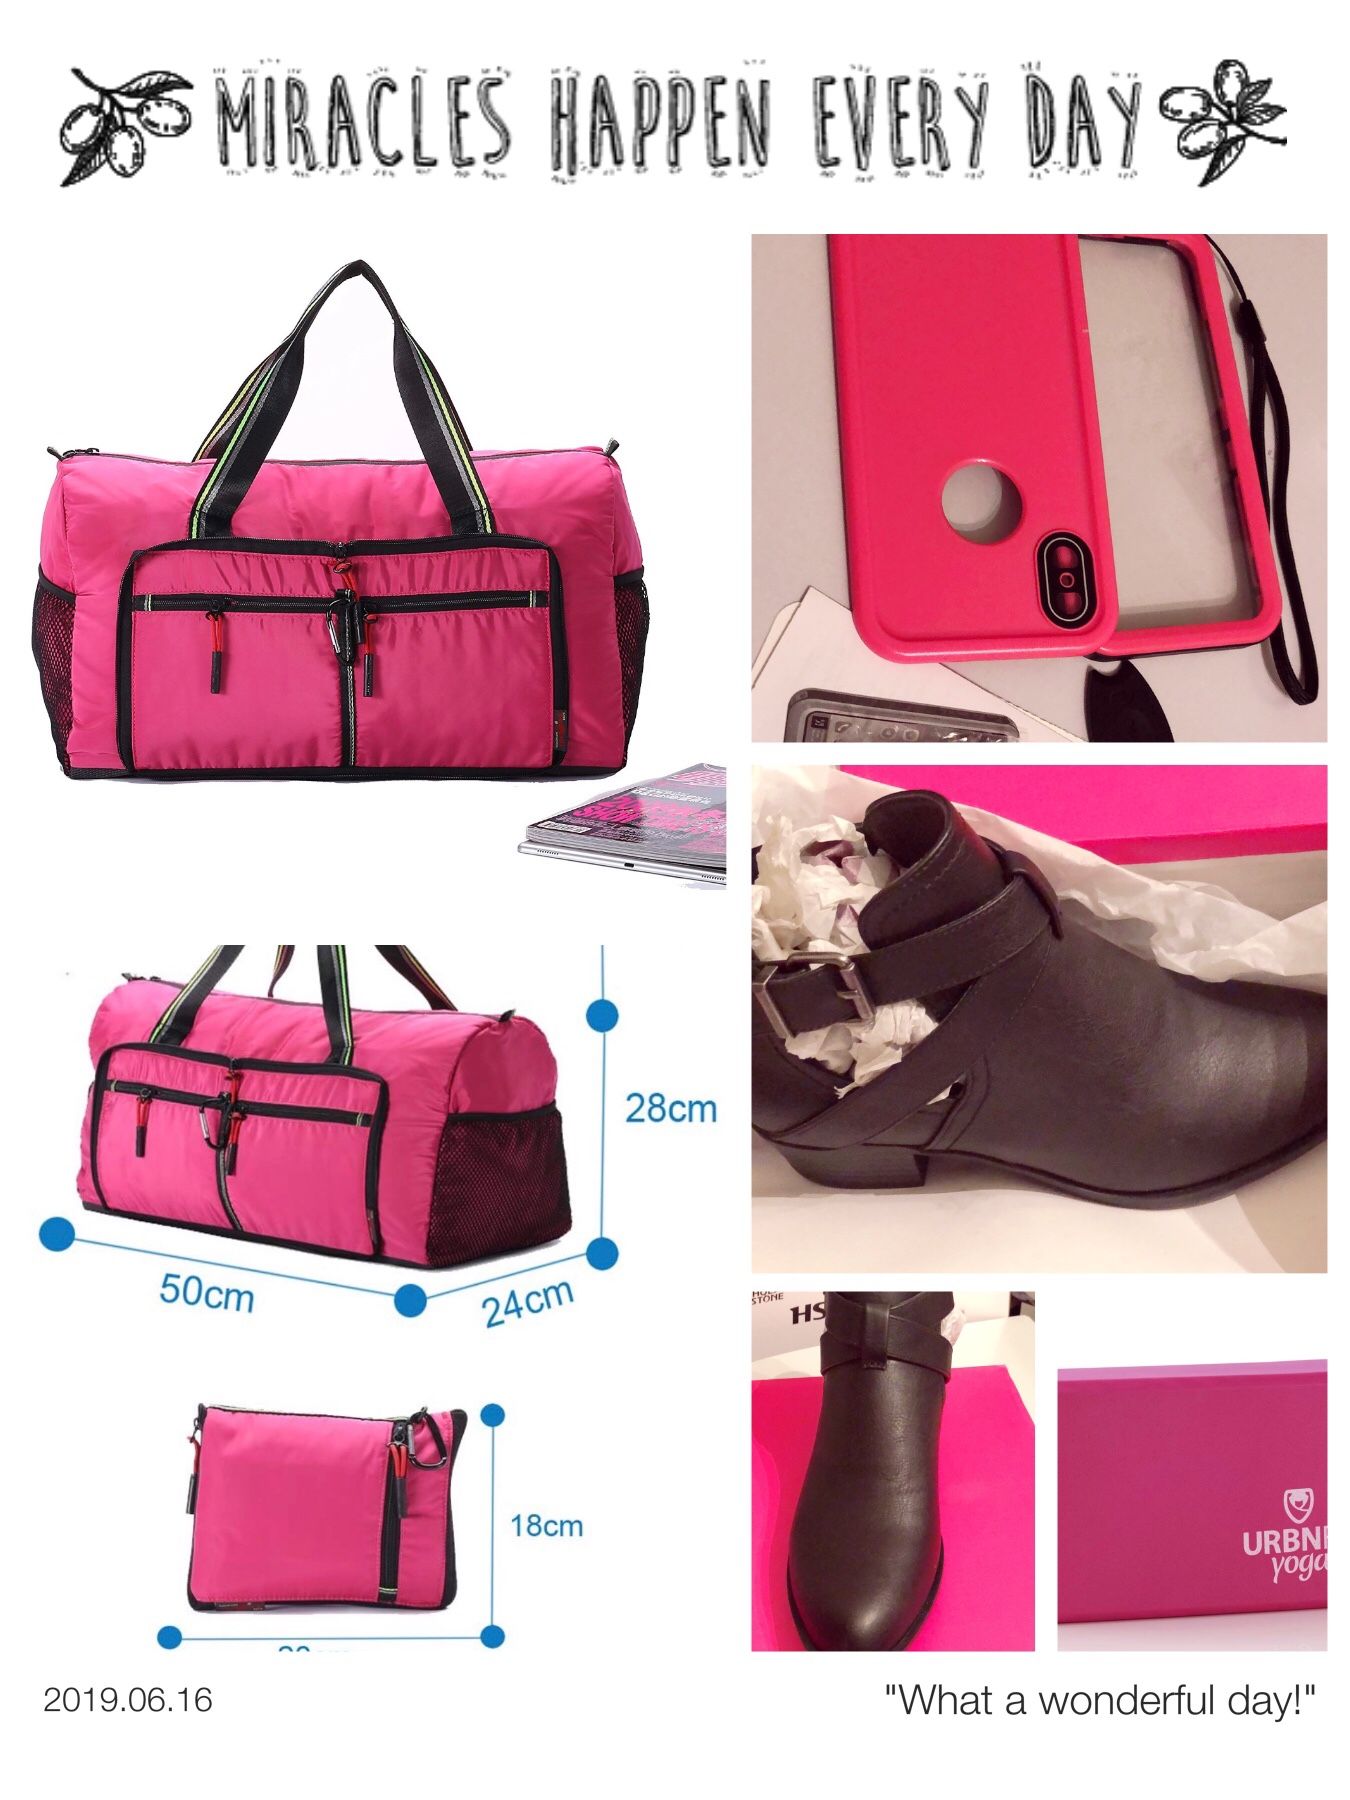 PINK/duffle bag/gym bag,iphone case x/10,yoga block,and pair of women’s leather ankle booths(size-6